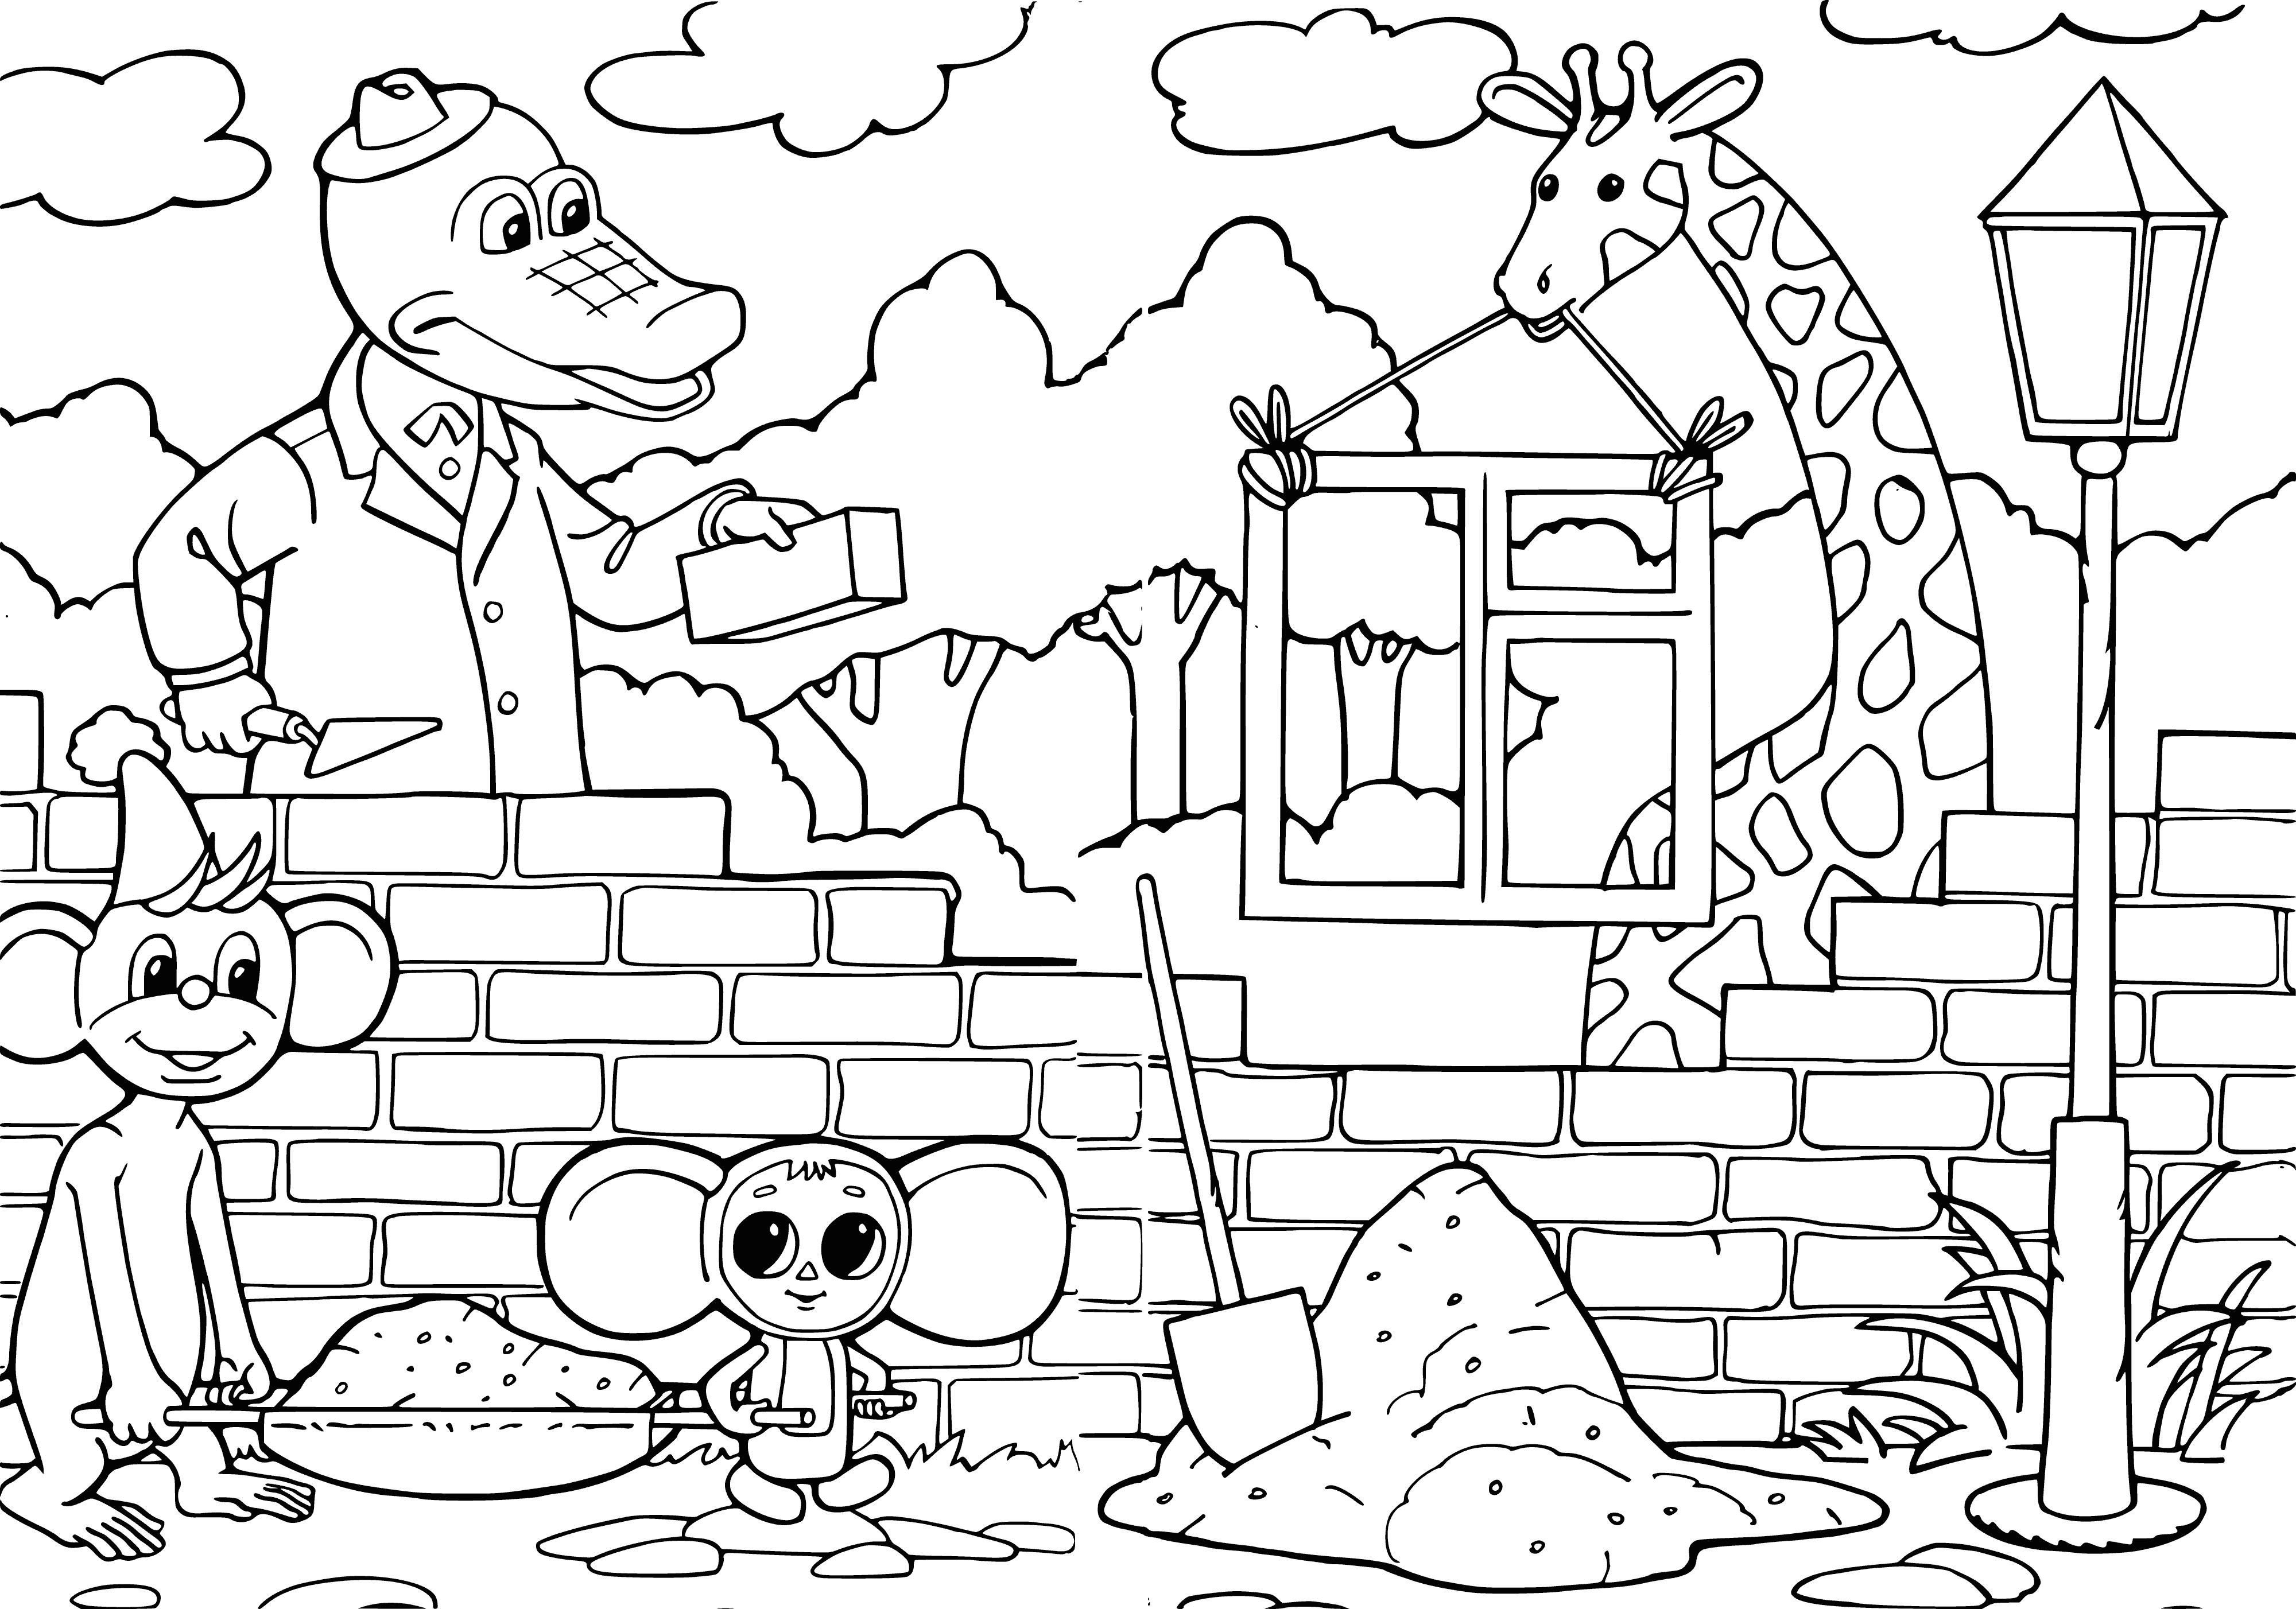 coloring page: Cheburashka, Gena and Shapoklyak work together to build a "House of Friendship". Teeth, hammer, nails: all brought together in friendship!